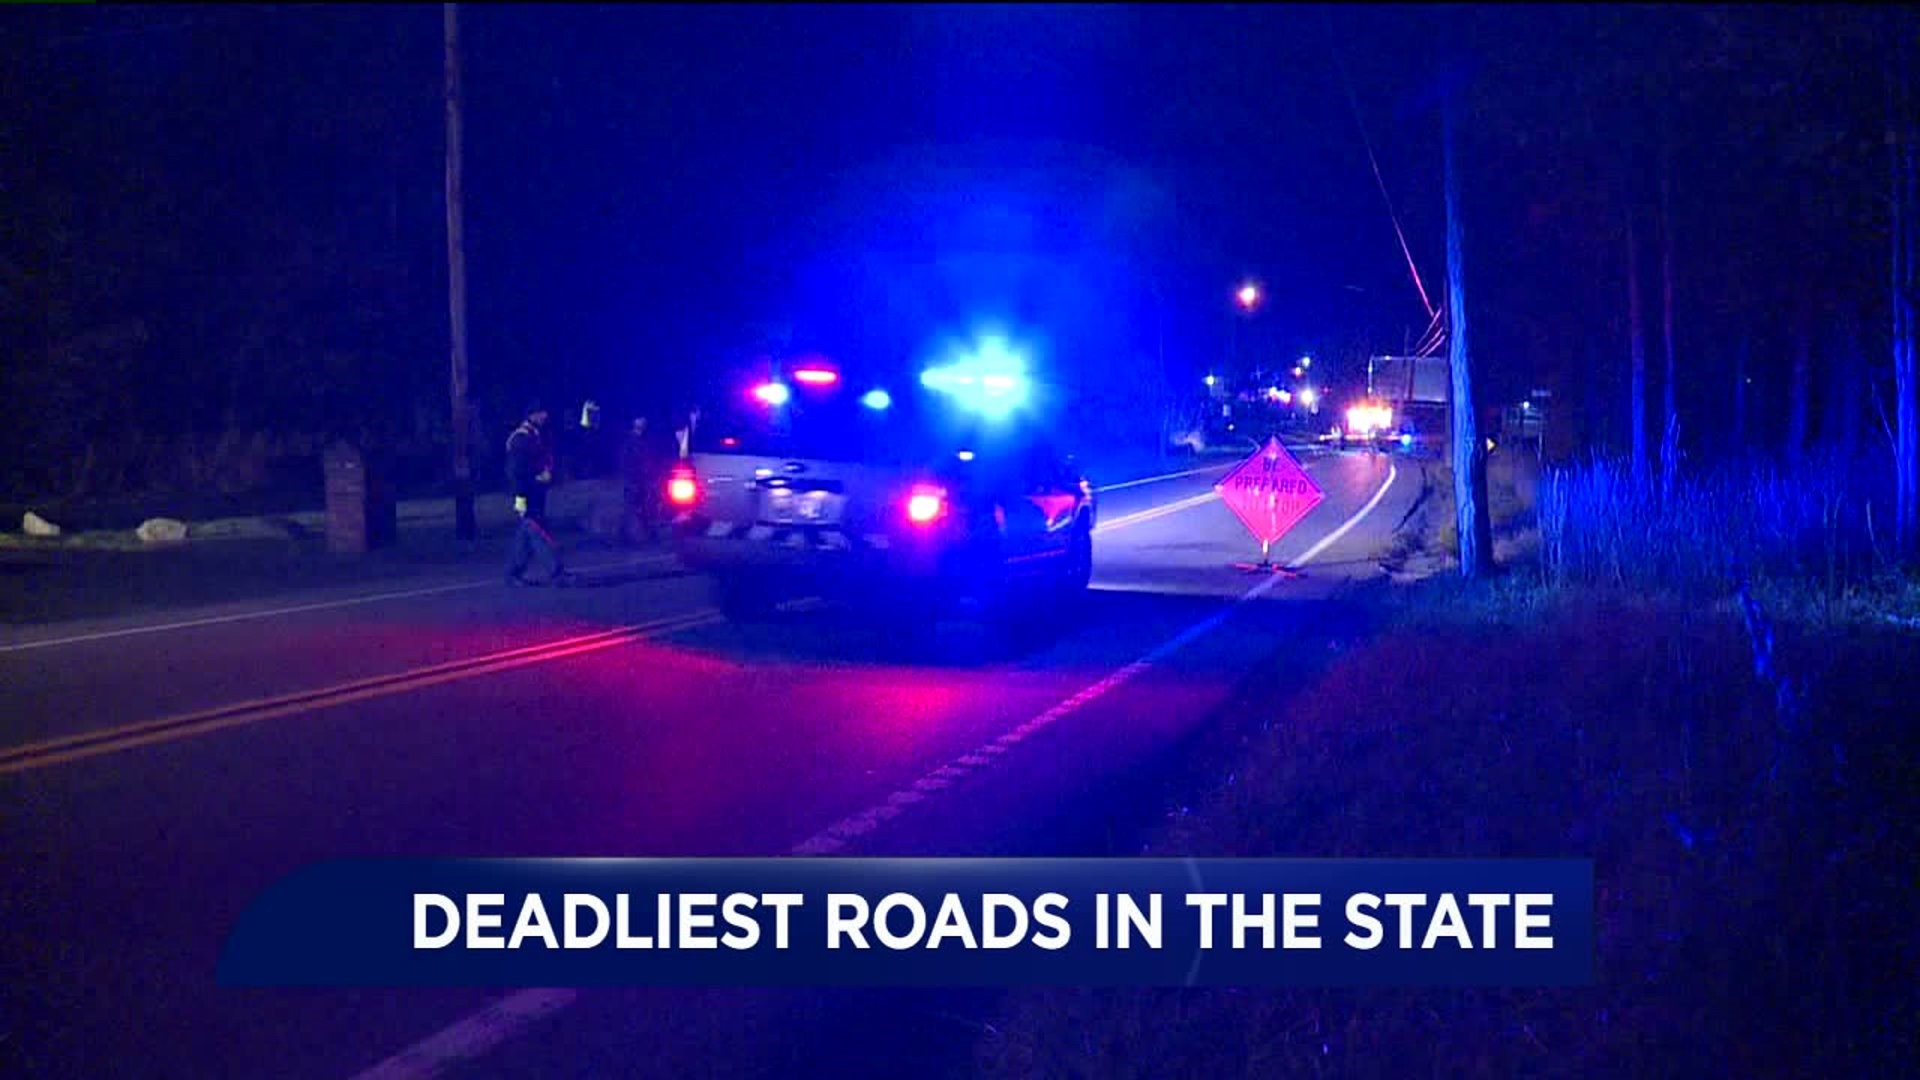 Road in Poconos Ranked One of the Deadliest in State